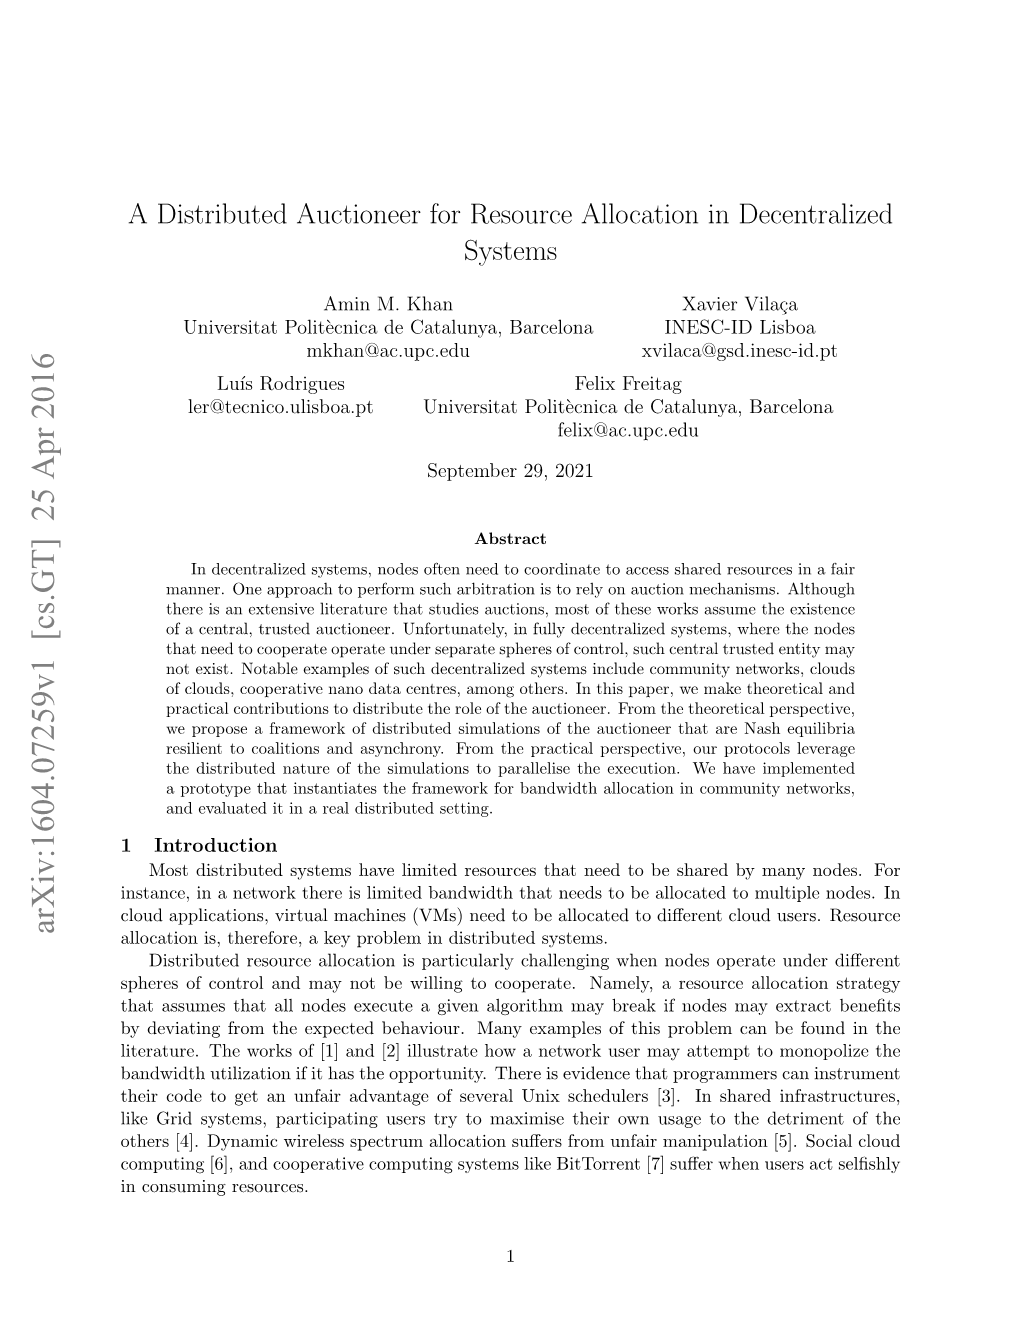 A Distributed Auctioneer for Resource Allocation in Decentralized Systems